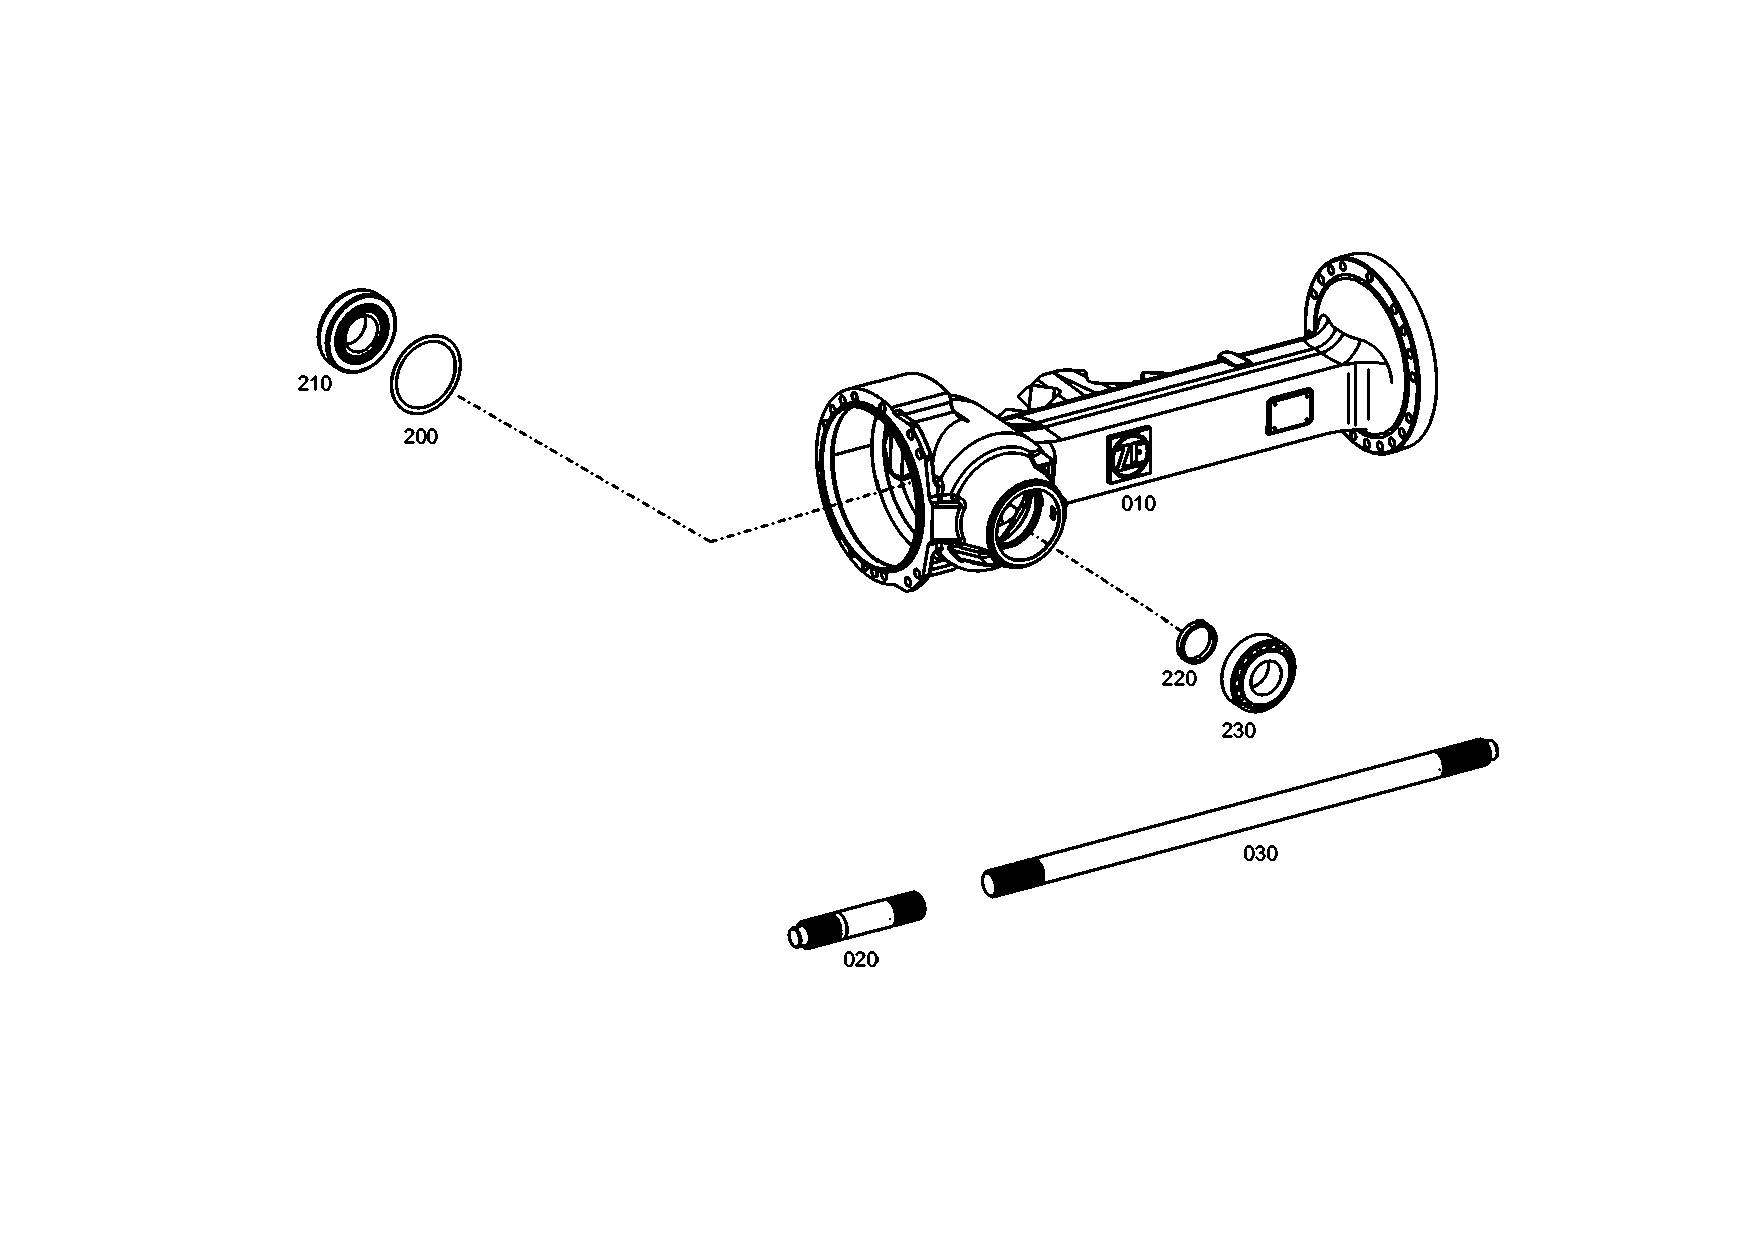 drawing for BUCHER FRANZ GMBH A0003510601 - AXLE CASING (figure 2)